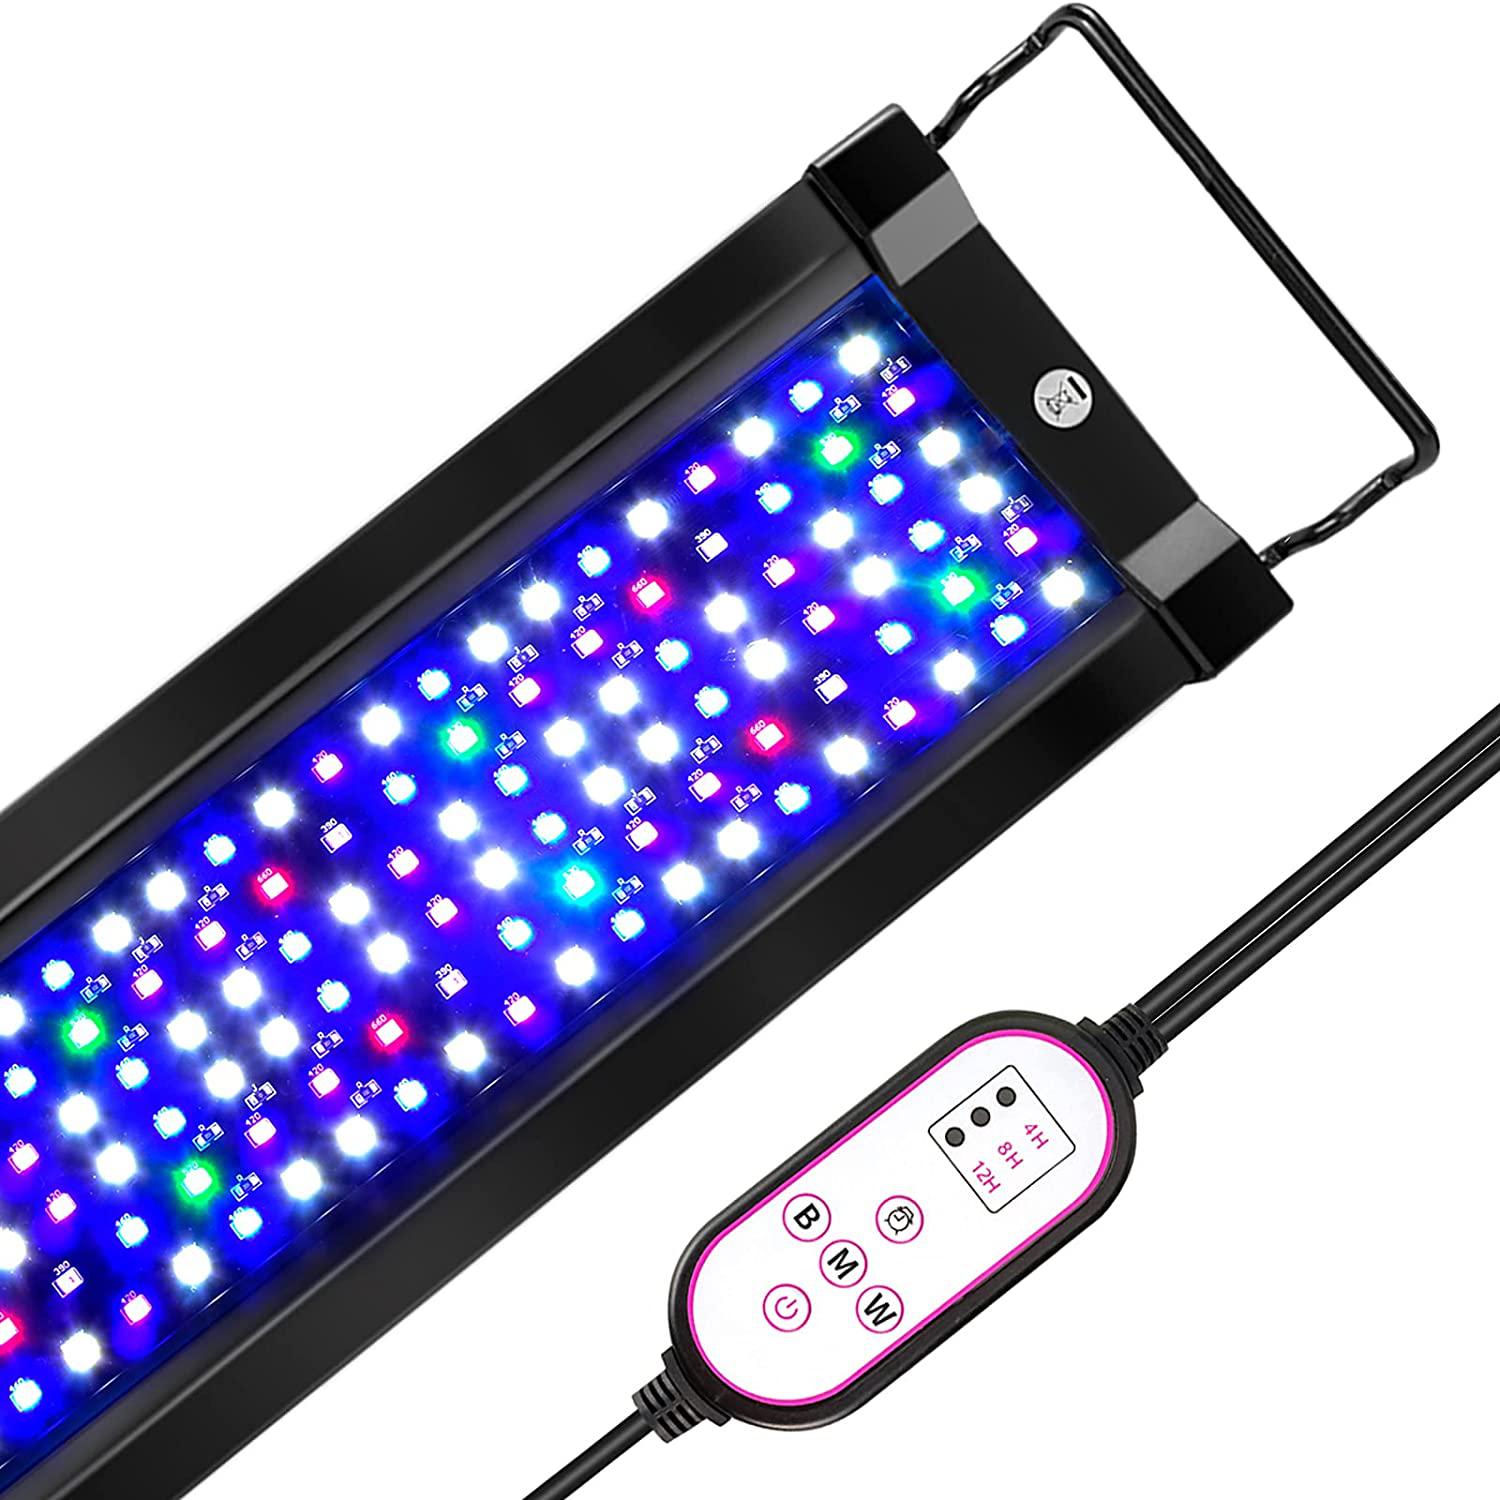 Lucare 50W 36-48 Inch Saltwater Aquarium Light with Full Spectrum LED, Exclusive Reef Coral Light Spectrum for Marine Fish Tank，Dimmable Dual Channel for LPS & SPS